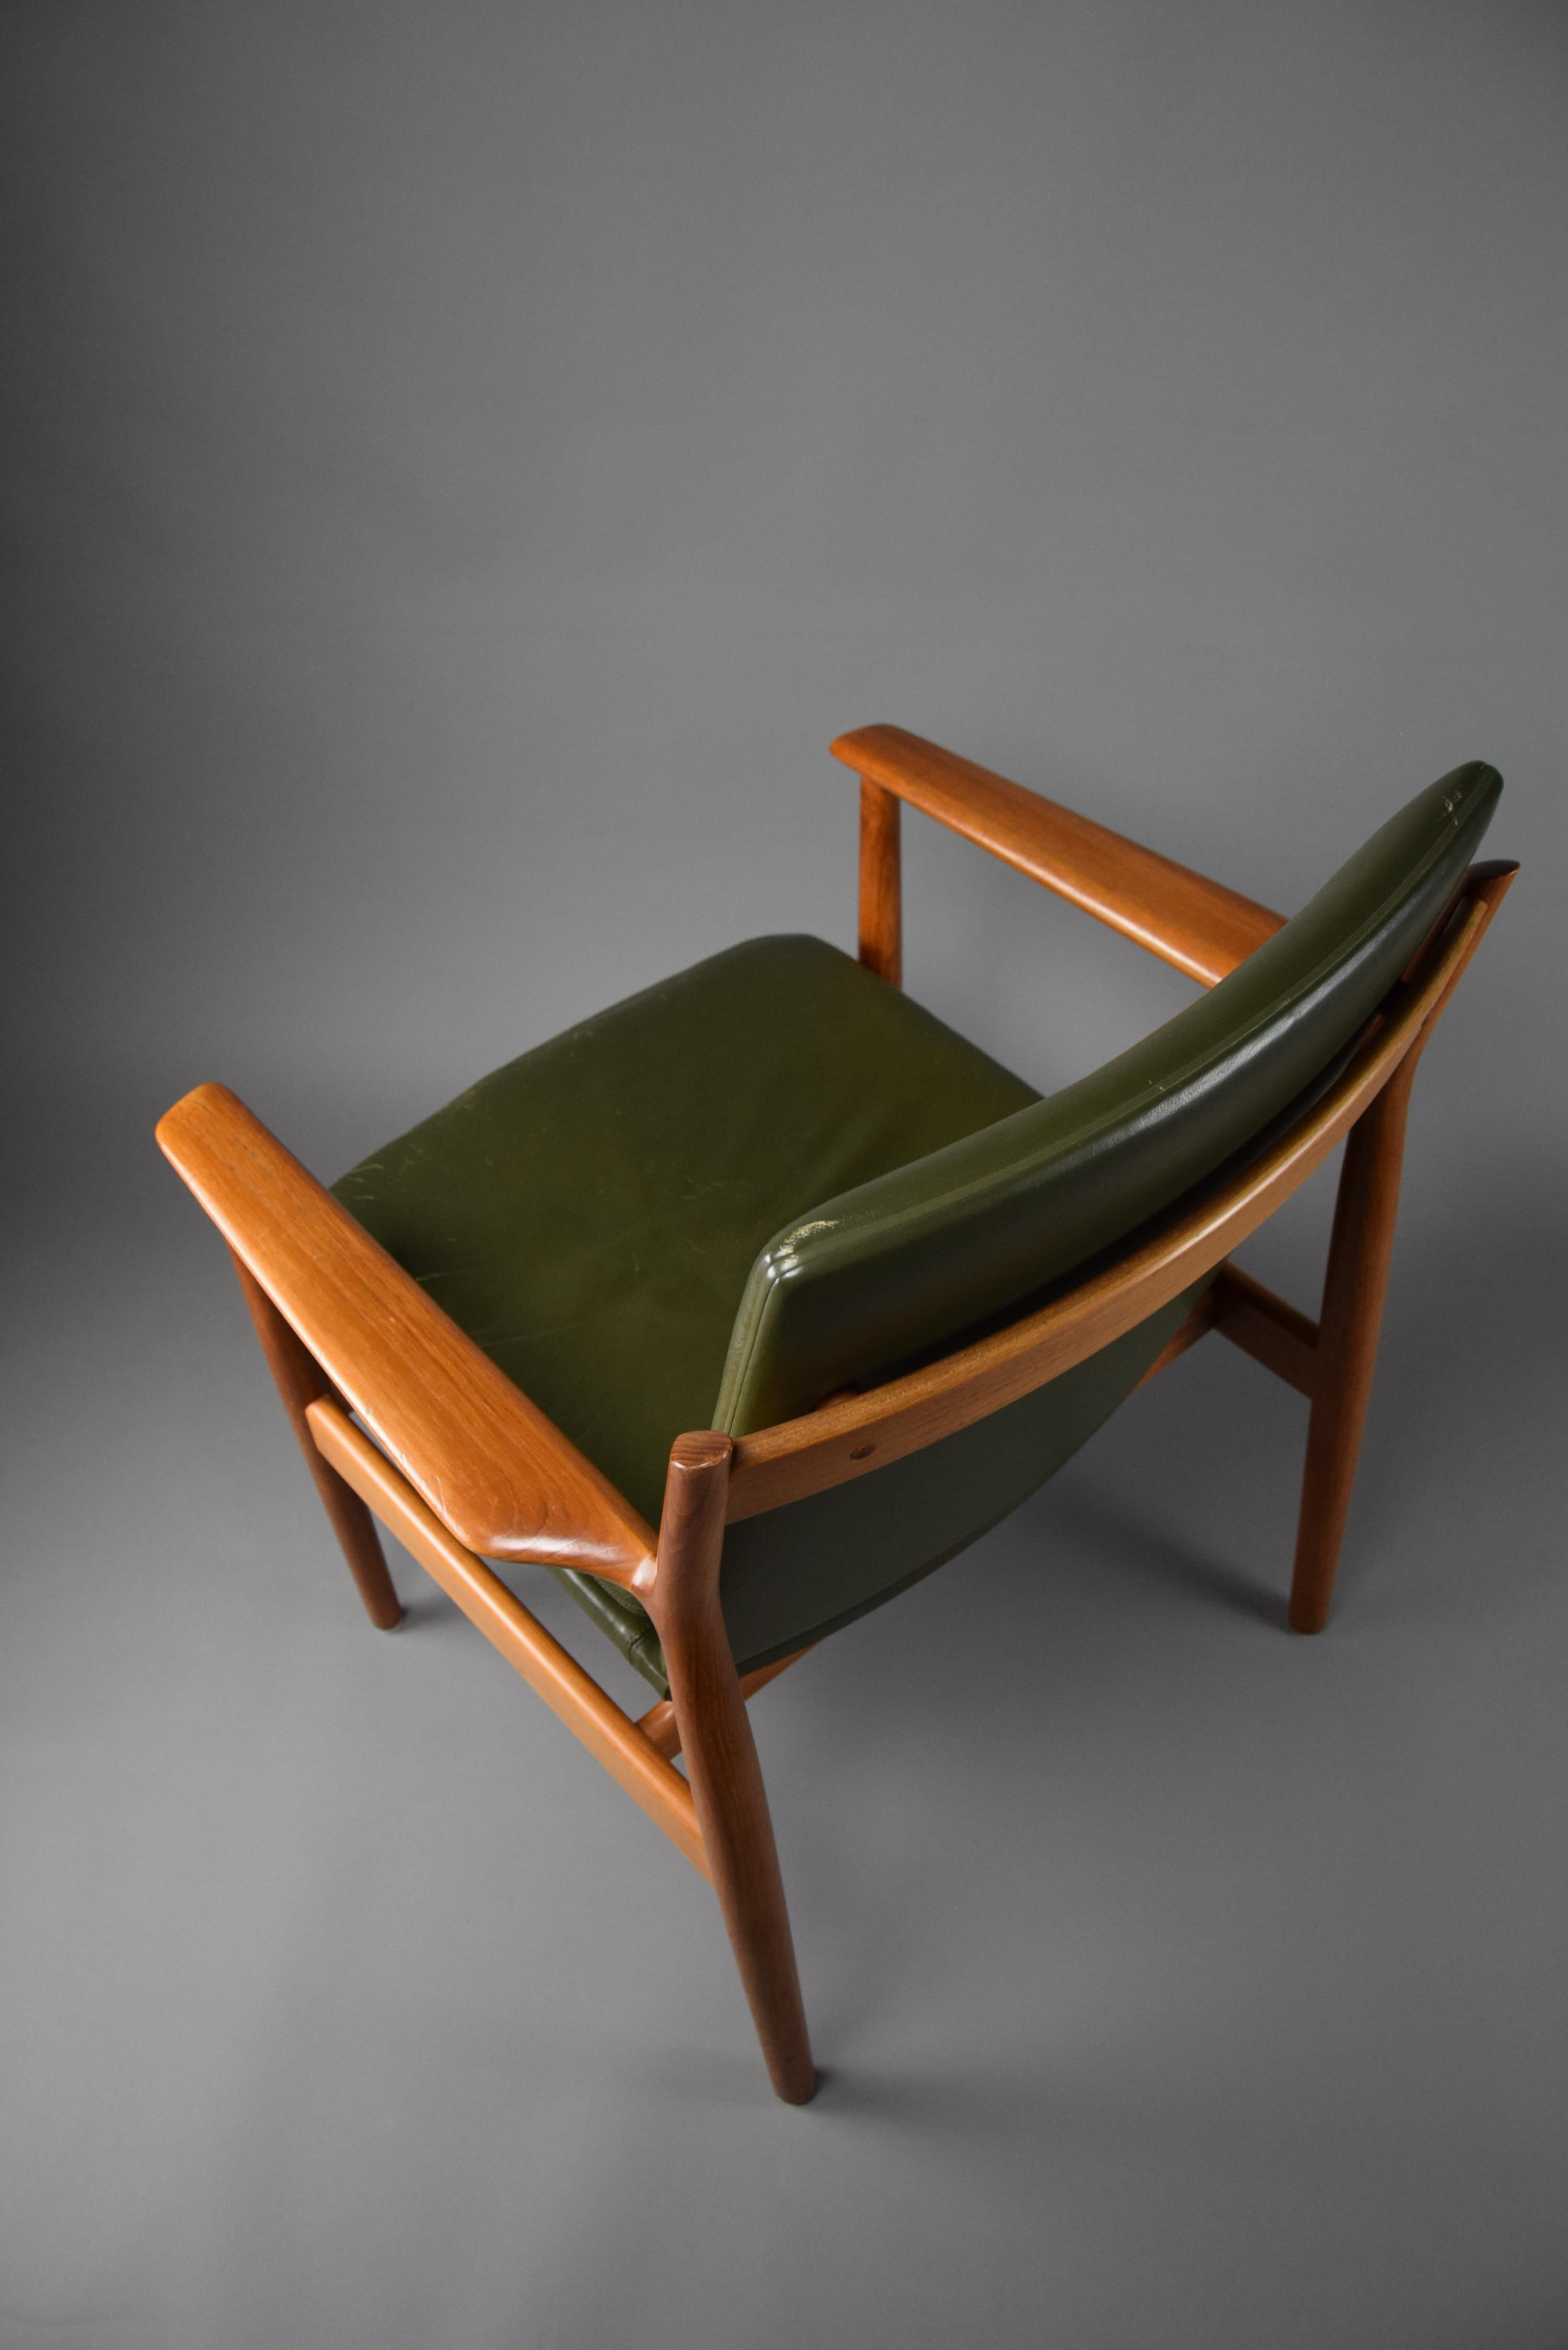 Mid-20th Century Danish Olive Green Armchair Model 431 by Arne Vodder for Sibast 1960 For Sale